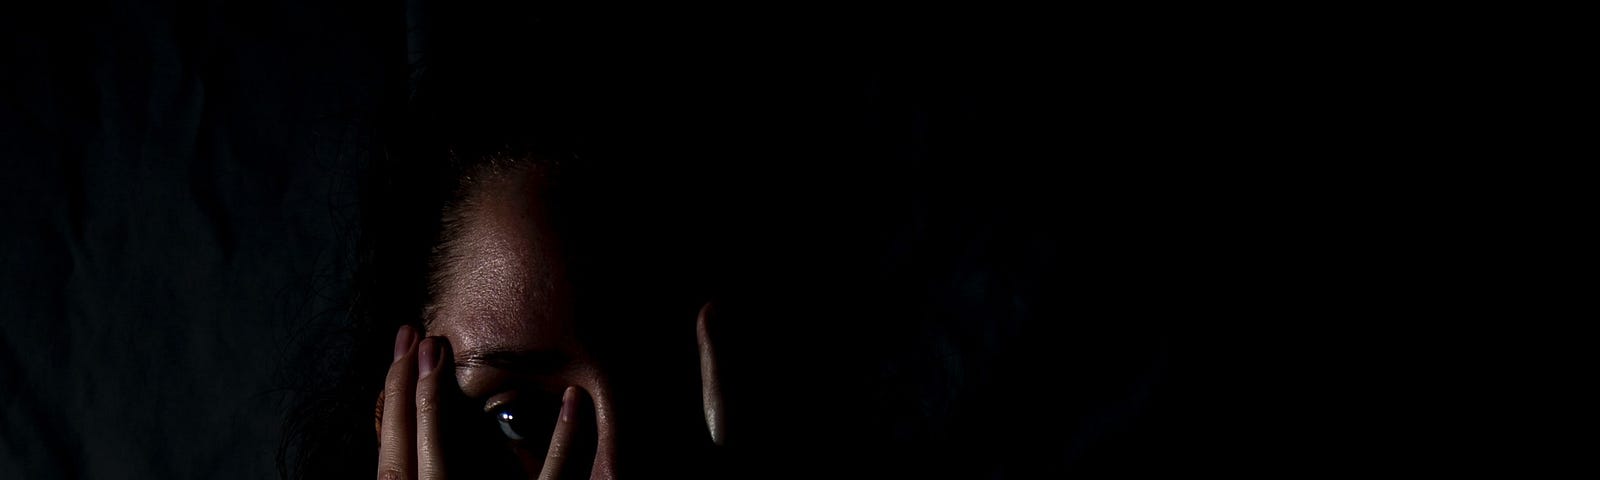 Against a black background, and in very low lighting, a woman covers her face with her hands, but spreads her fingers so she can see.